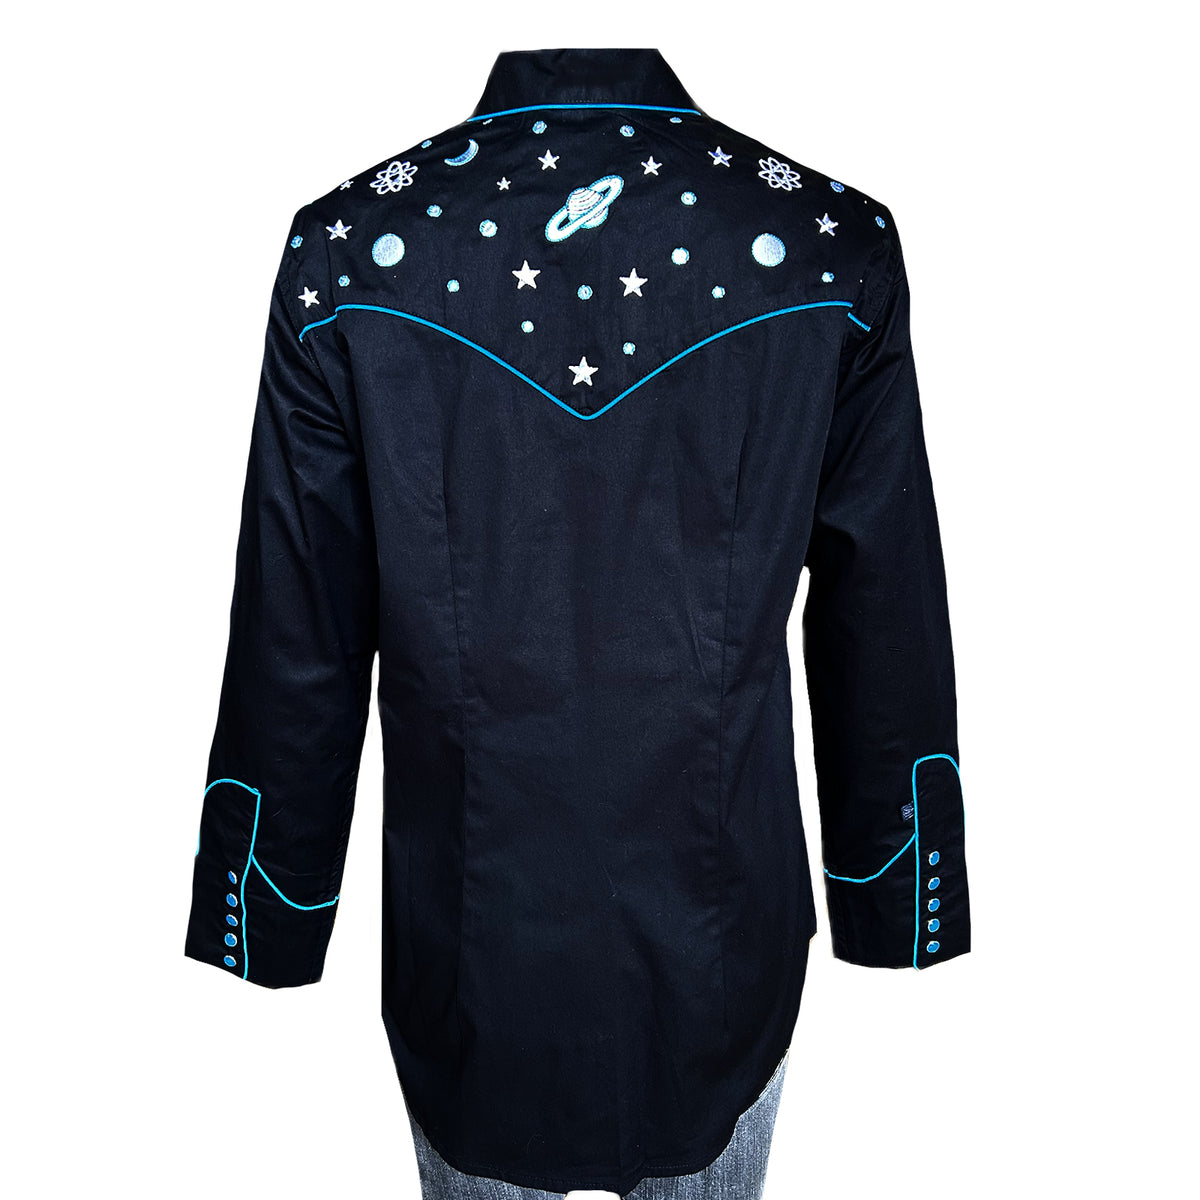 Women's Out of This World Embroidered Black Western Shirt